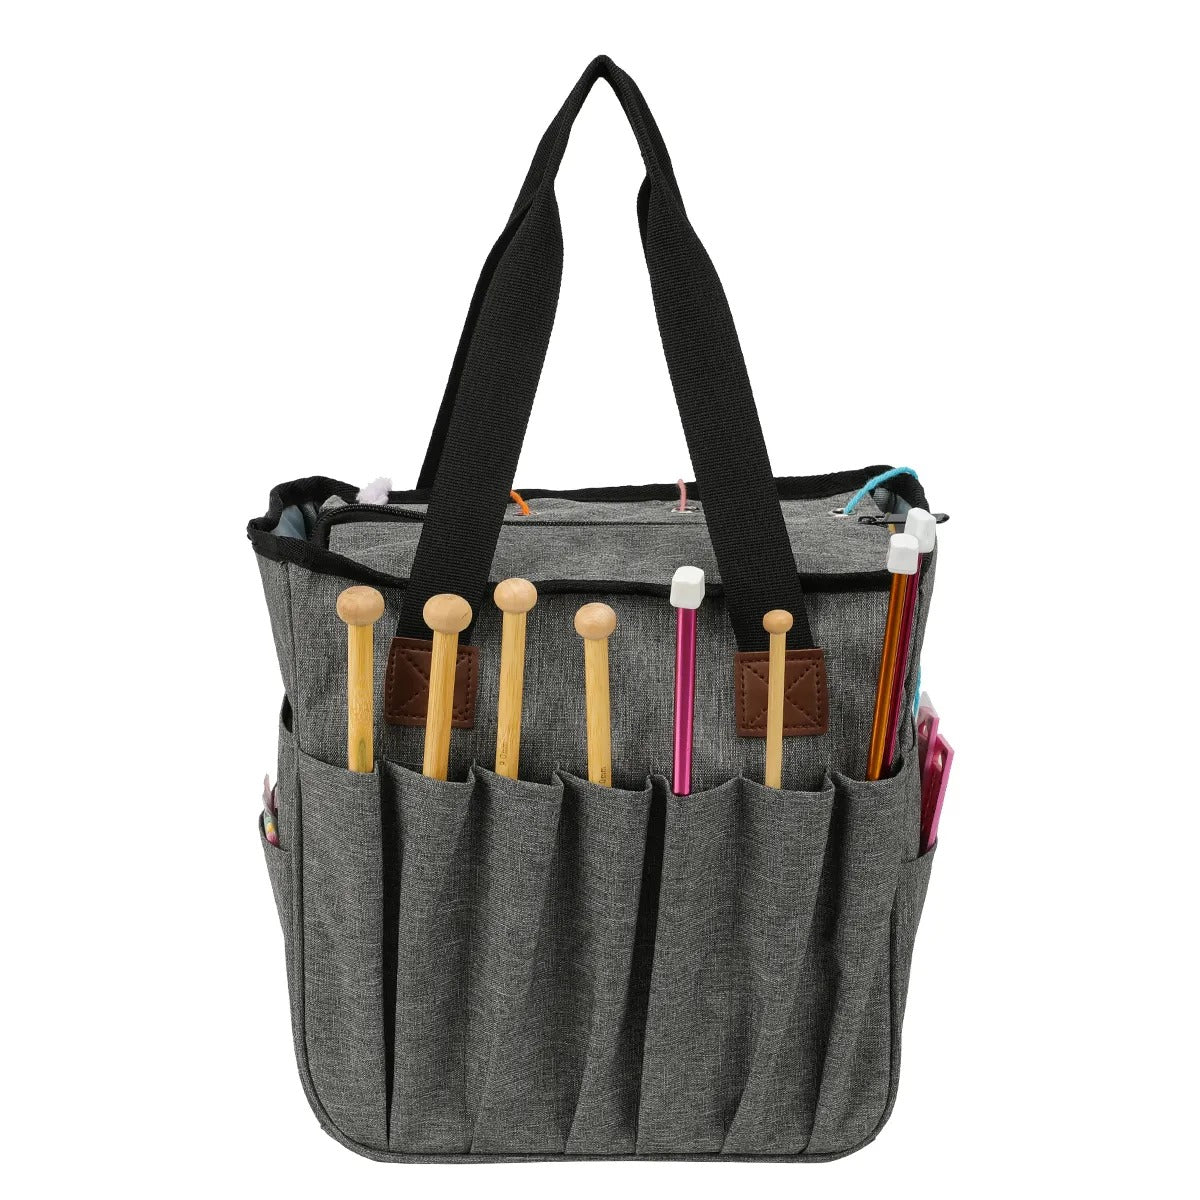 Yarn Organizer Tote with external pockets filled with various knitting essentials and crocheting essentials.